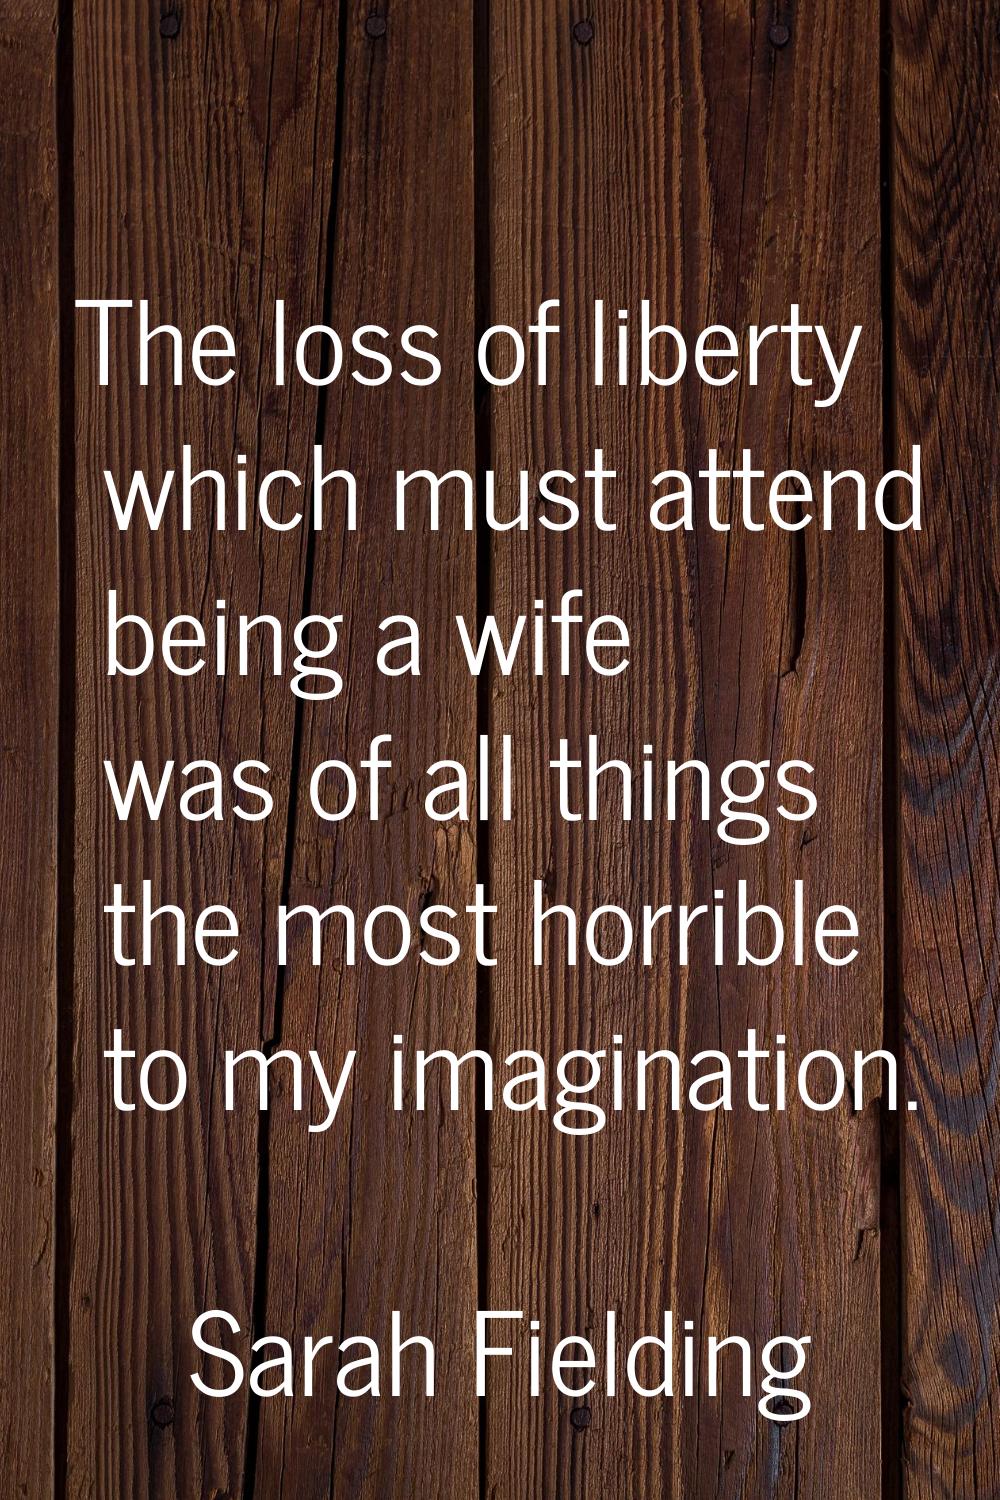 The loss of liberty which must attend being a wife was of all things the most horrible to my imagin